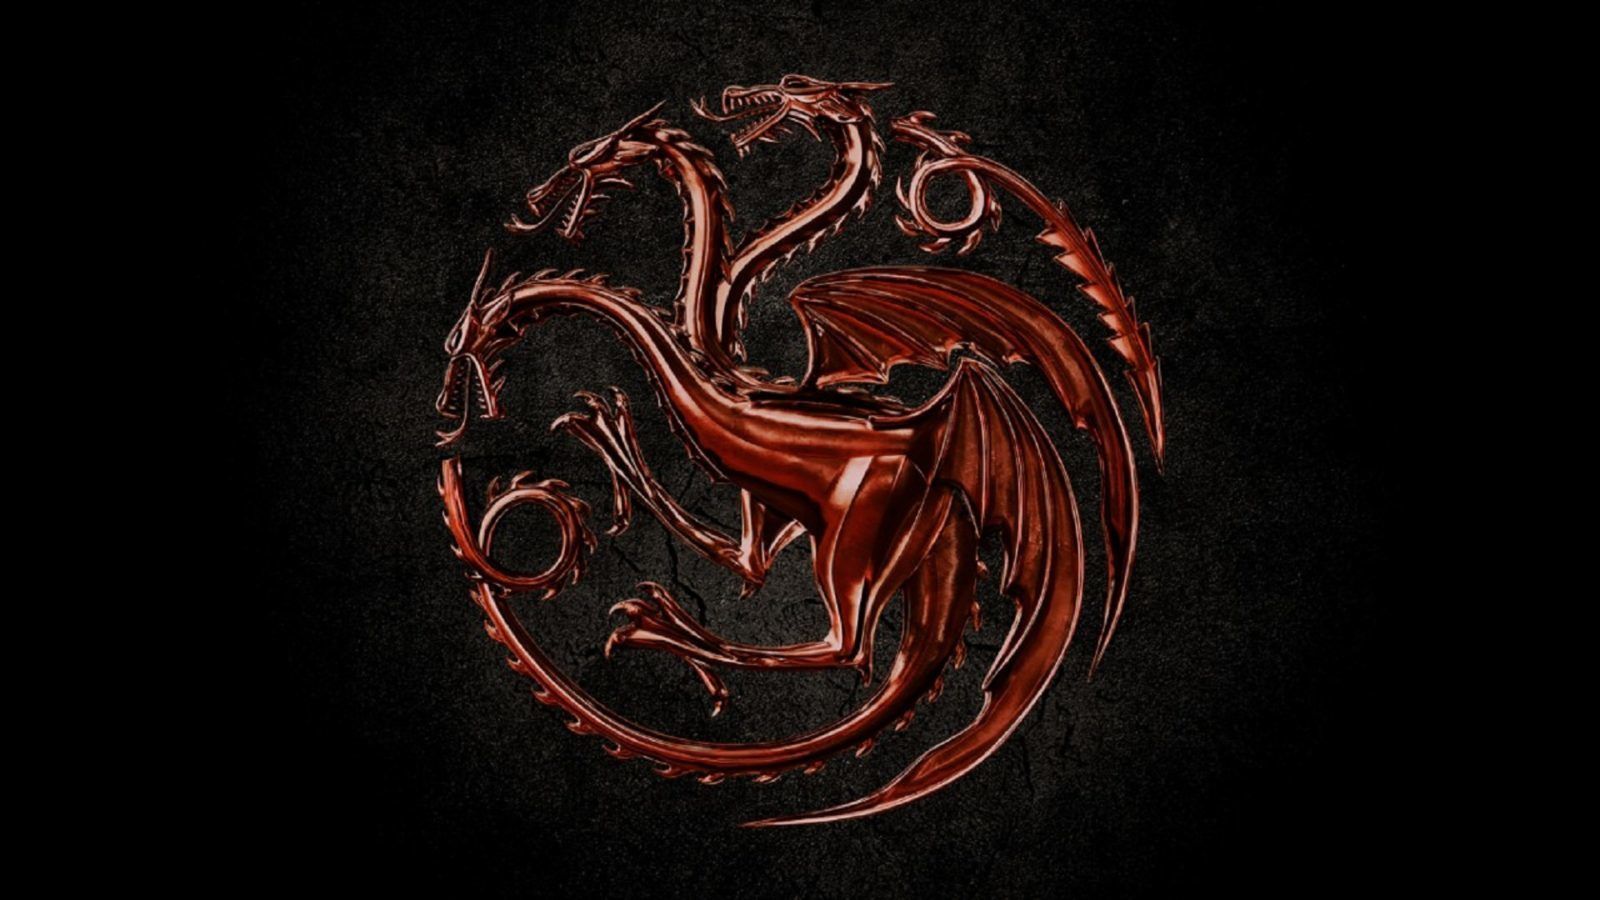 Game of Thrones & House of the Dragon